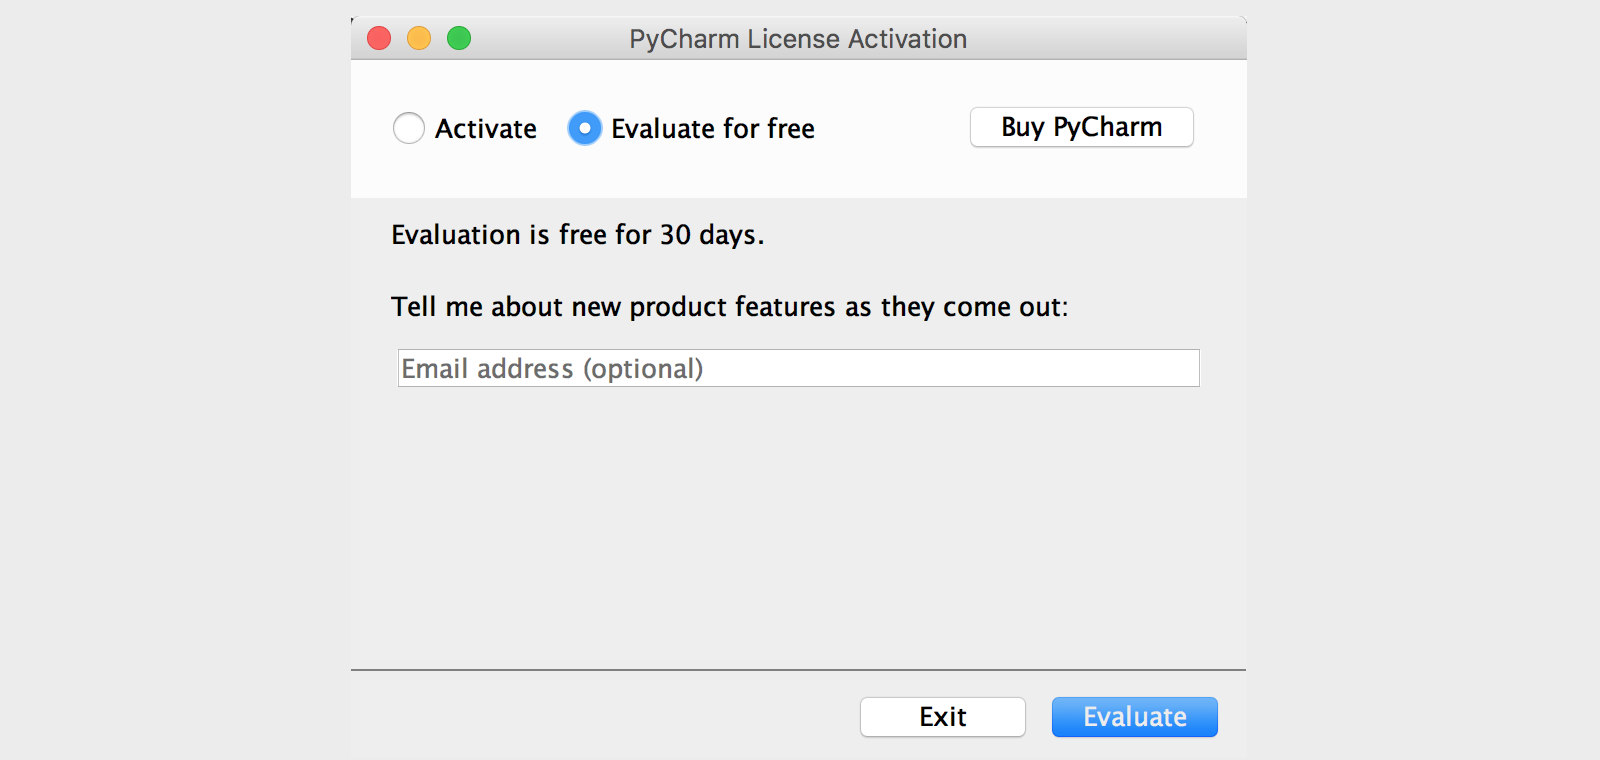 res/pycharm-activation.png